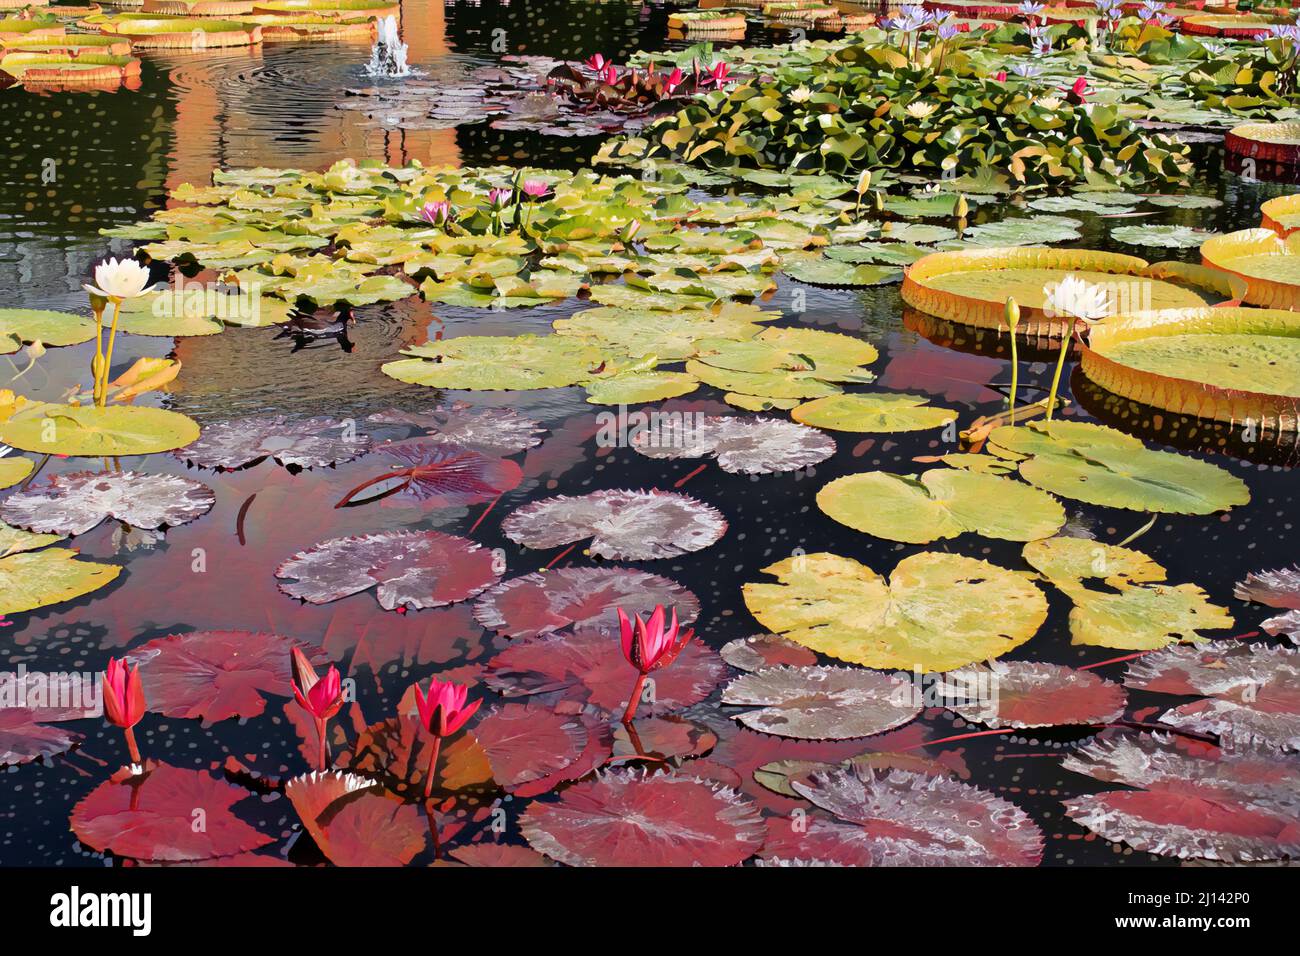 Vashon, WA Cedar walkway encircles a quiet pond with pond lilies and  grasses in summer garden Stock Photo - Alamy